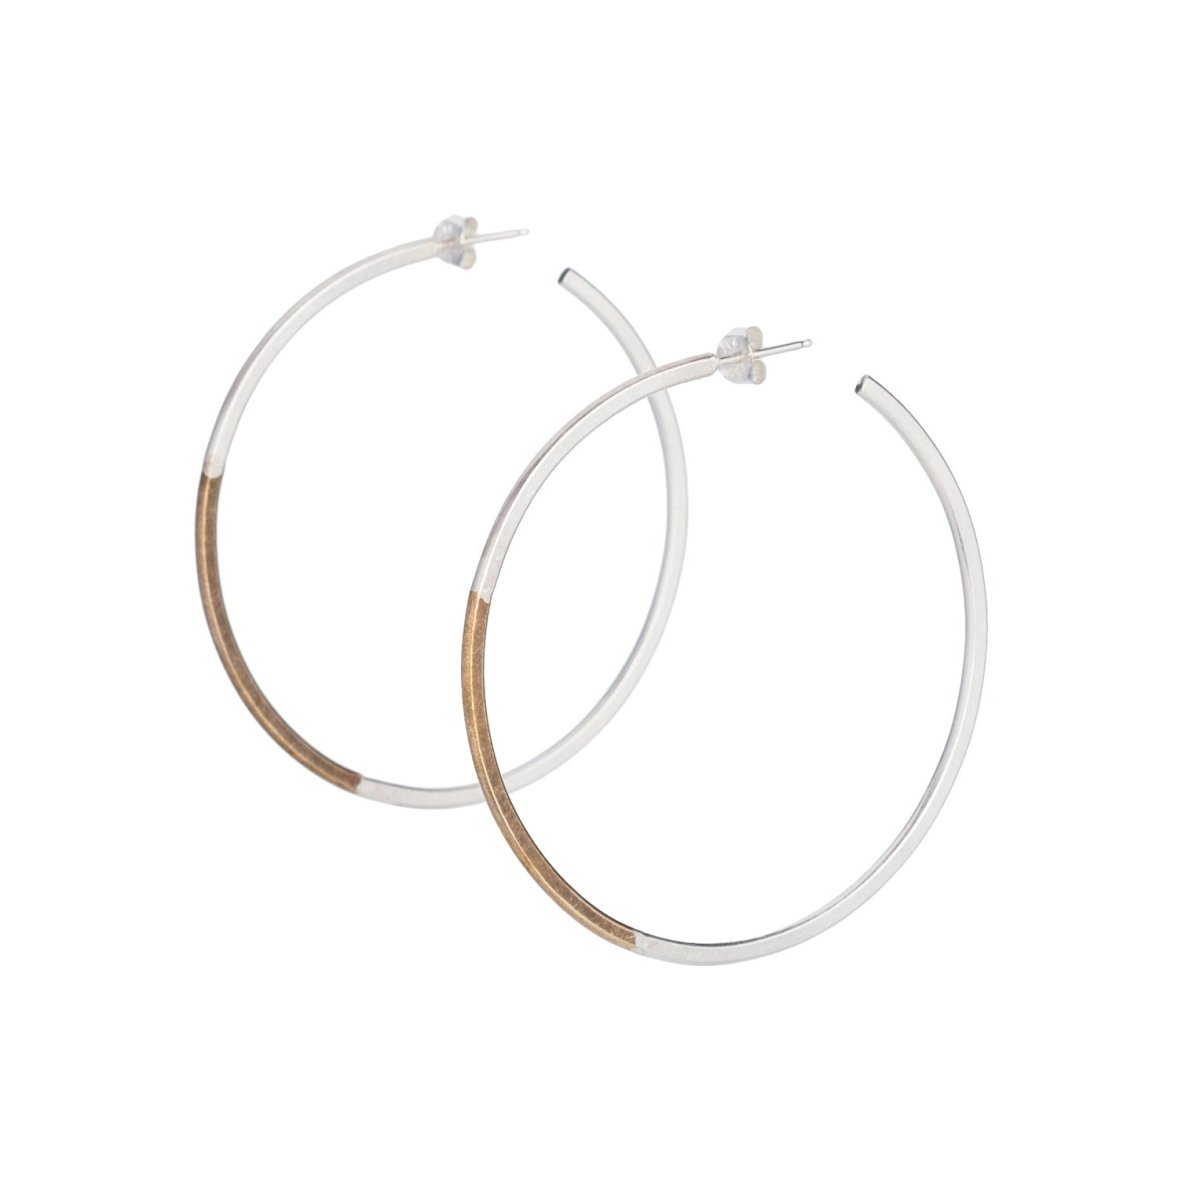 Classic, large, lightweight hoop earrings of mixed brass and sterling silver hand-forged wire, with sterling silver earring posts and sterling silver butterfly backings. Hand-crafted in Portland, Oregon.